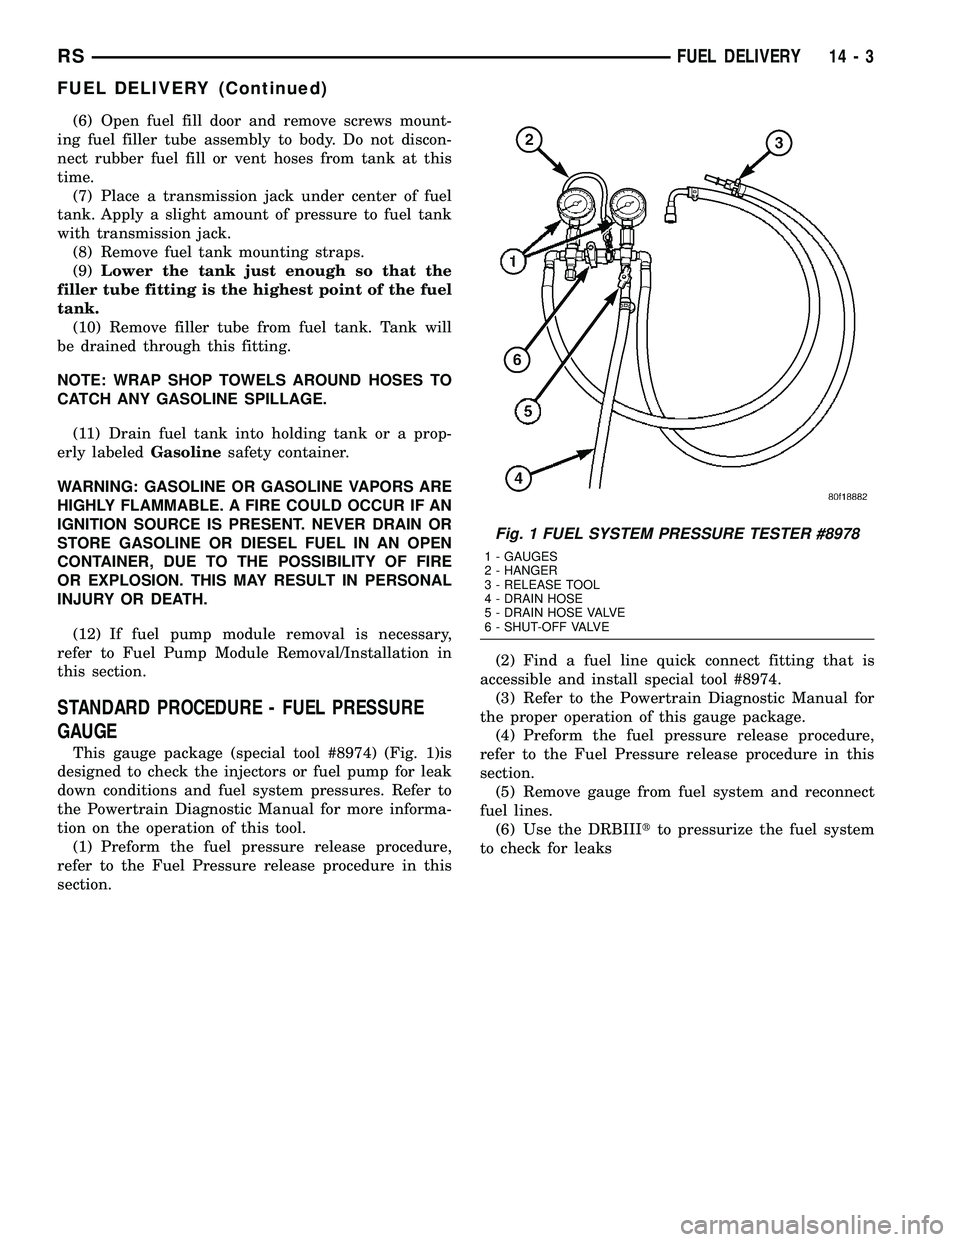 CHRYSLER VOYAGER 2005  Service Manual (6) Open fuel fill door and remove screws mount-
ing fuel filler tube assembly to body. Do not discon-
nect rubber fuel fill or vent hoses from tank at this
time.
(7) Place a transmission jack under c